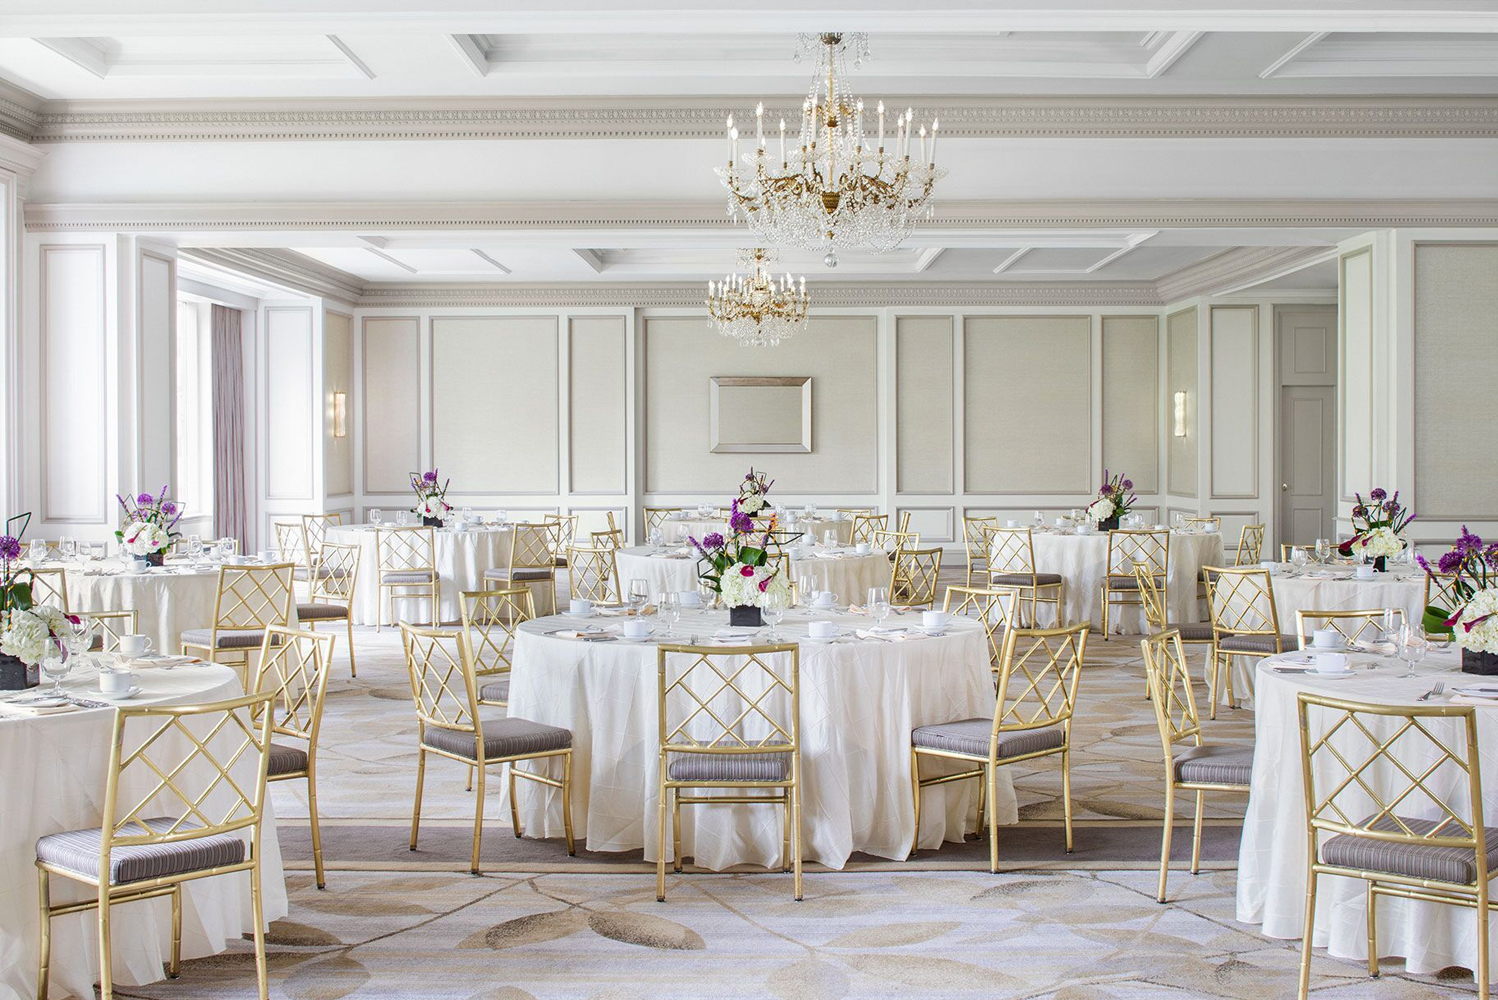 The Westin Philadelphia completed a 2 million renovation to its event spaces including the Grand Ballroom and the Georgian 